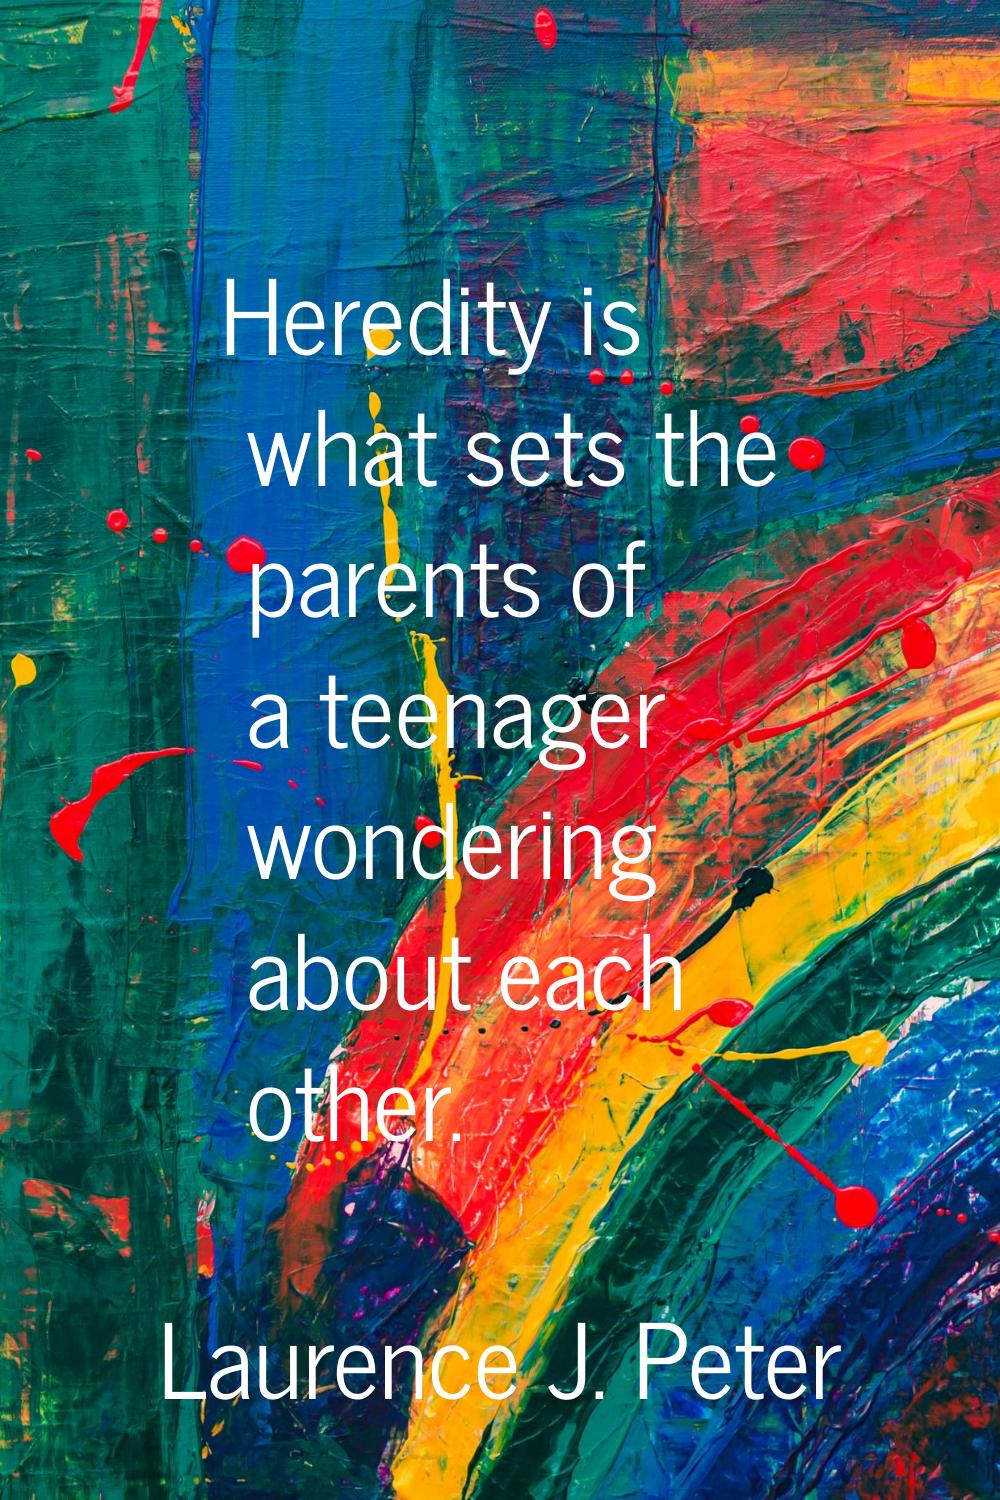 Heredity is what sets the parents of a teenager wondering about each other.